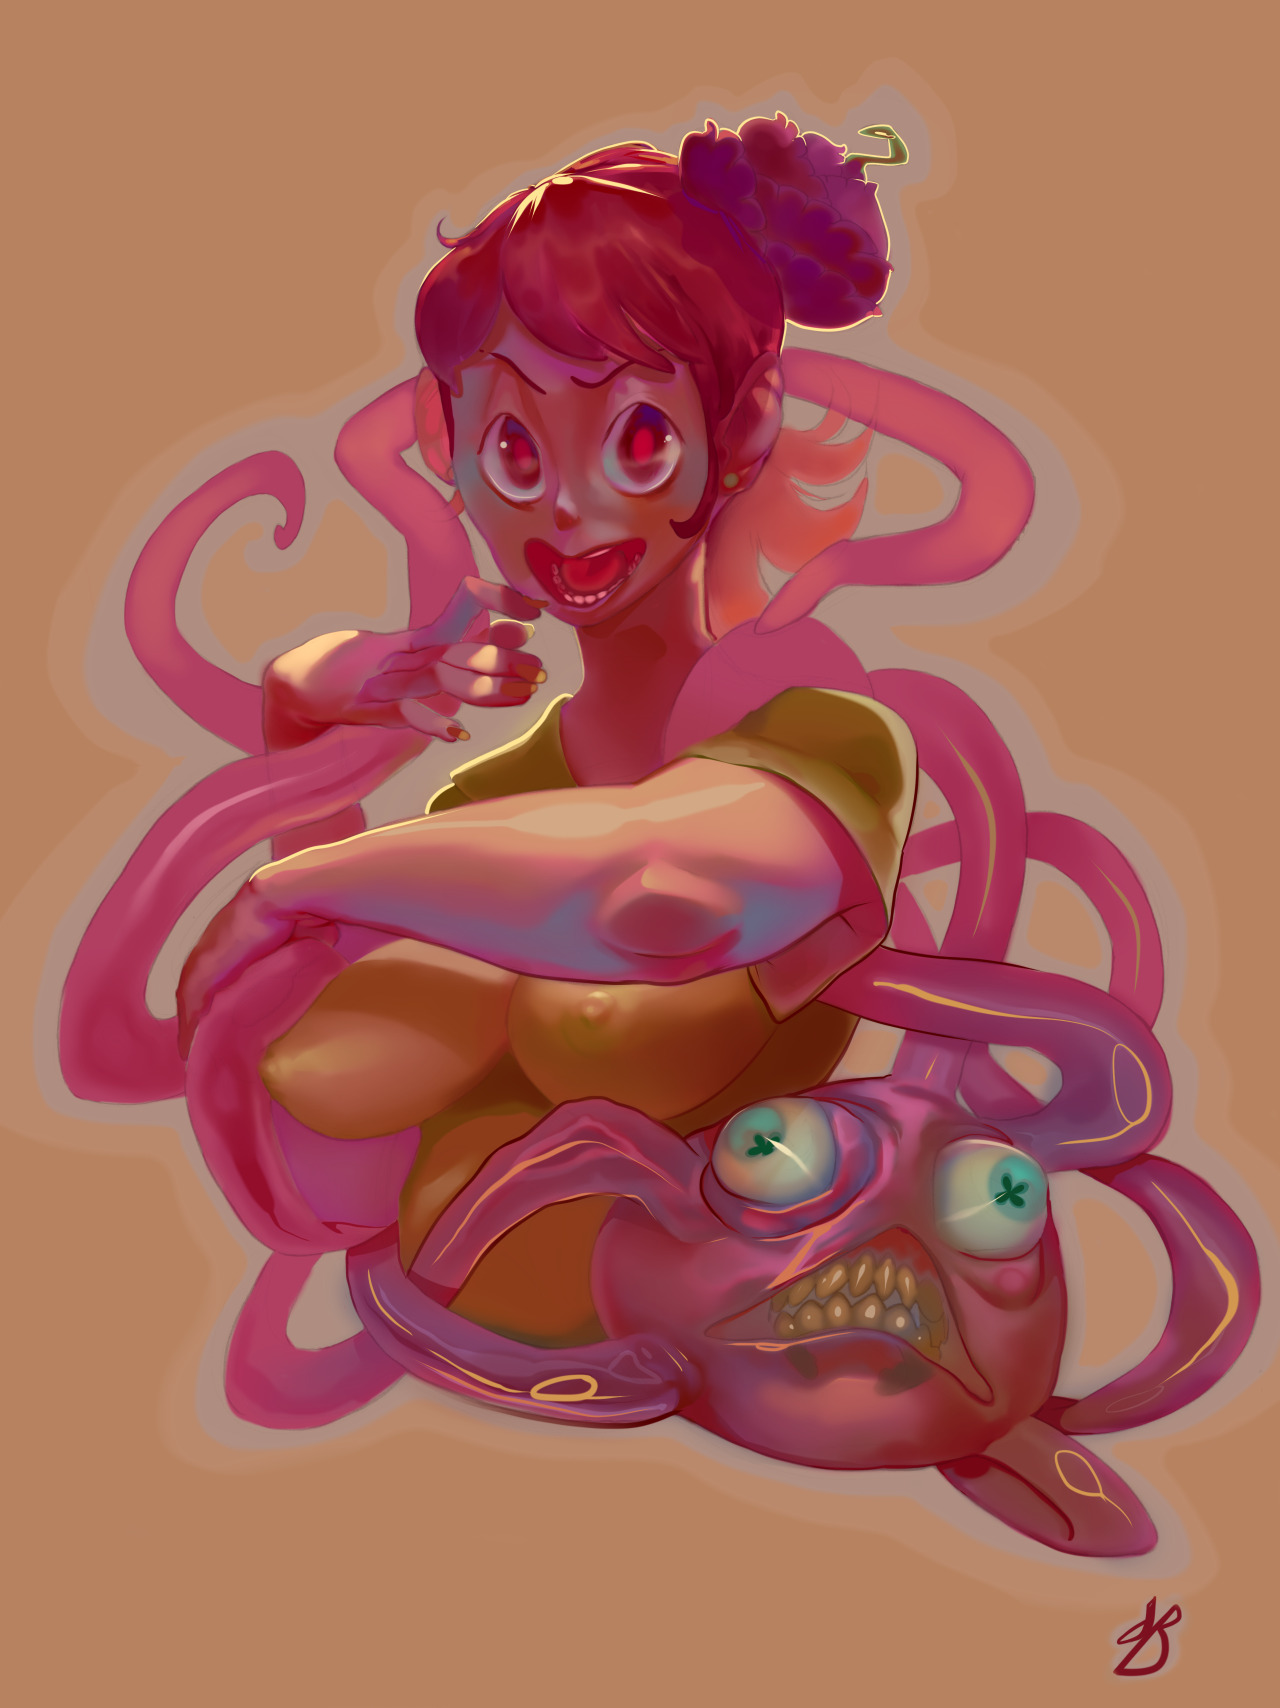 david-brun:  Finished commission for the project “Schoolgirls Love Tentacles”